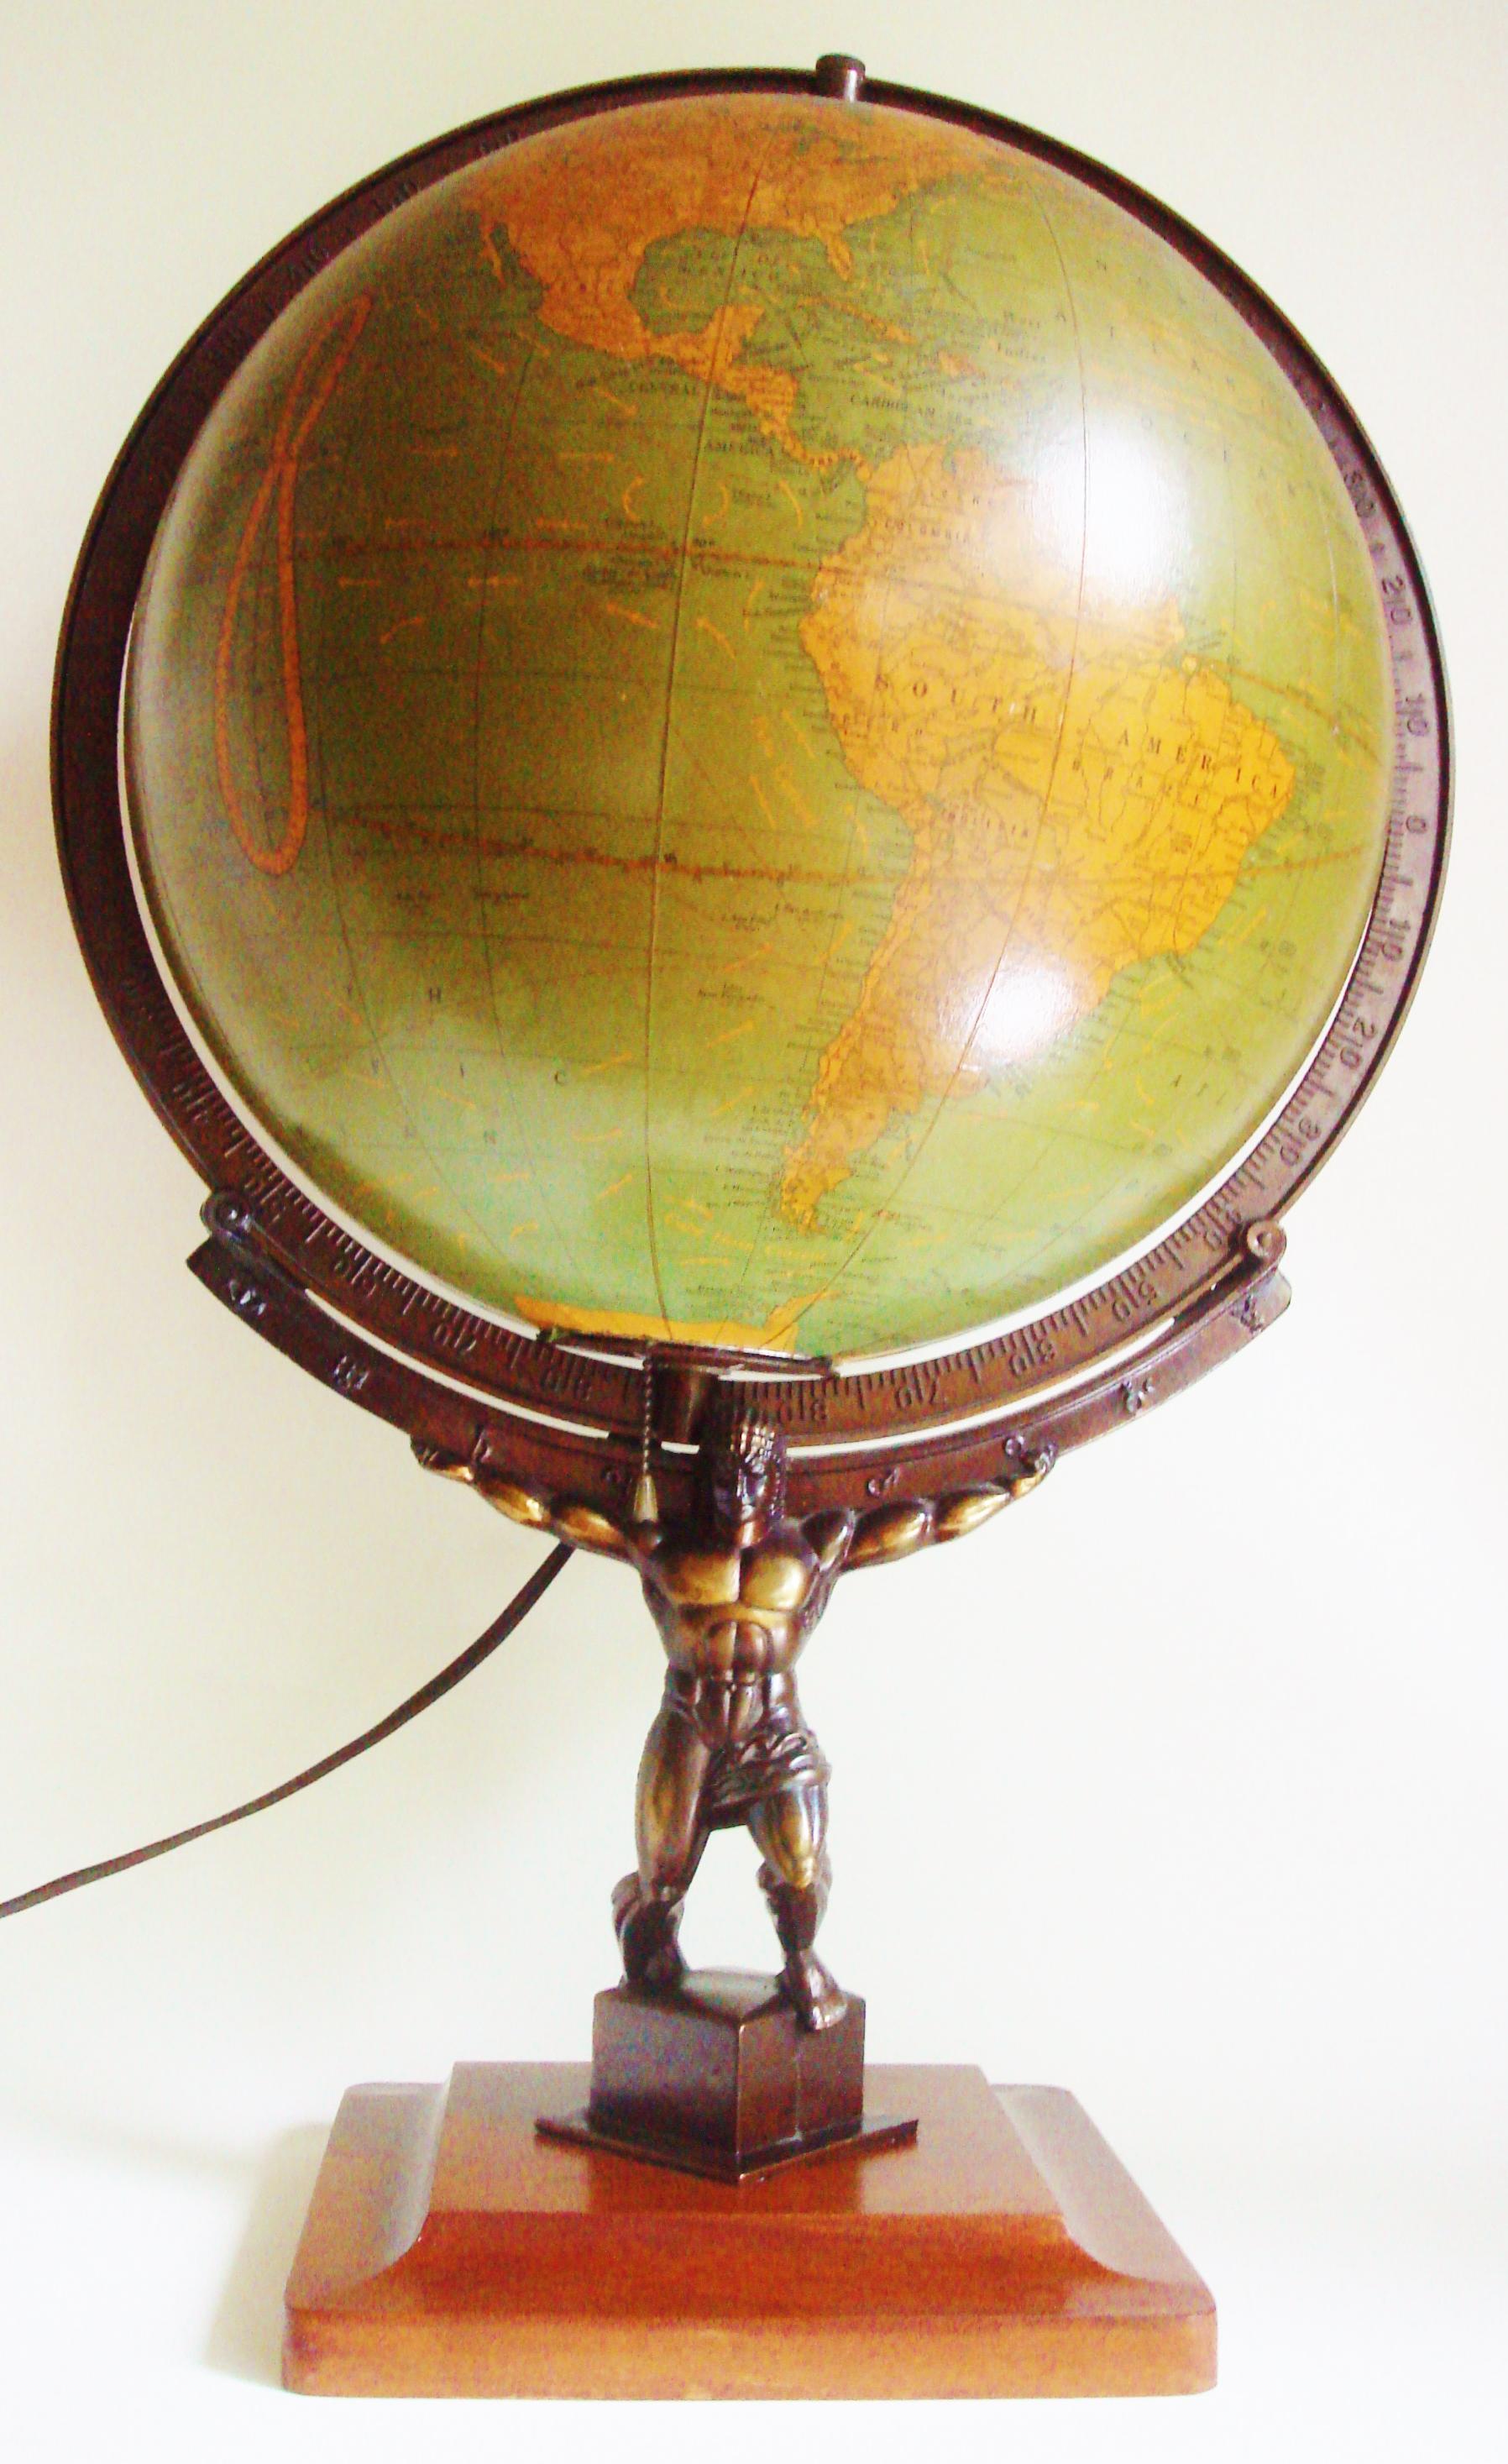 The design of this very rare example of the iconic illuminated figurative Atlas terrestial globe is based upon the 1937 Lee Lawrie and Rene Paul Chamberllan statue of Atlas in Rockefeller Plaza in NYC. This globe was introduced in 1949 by the George